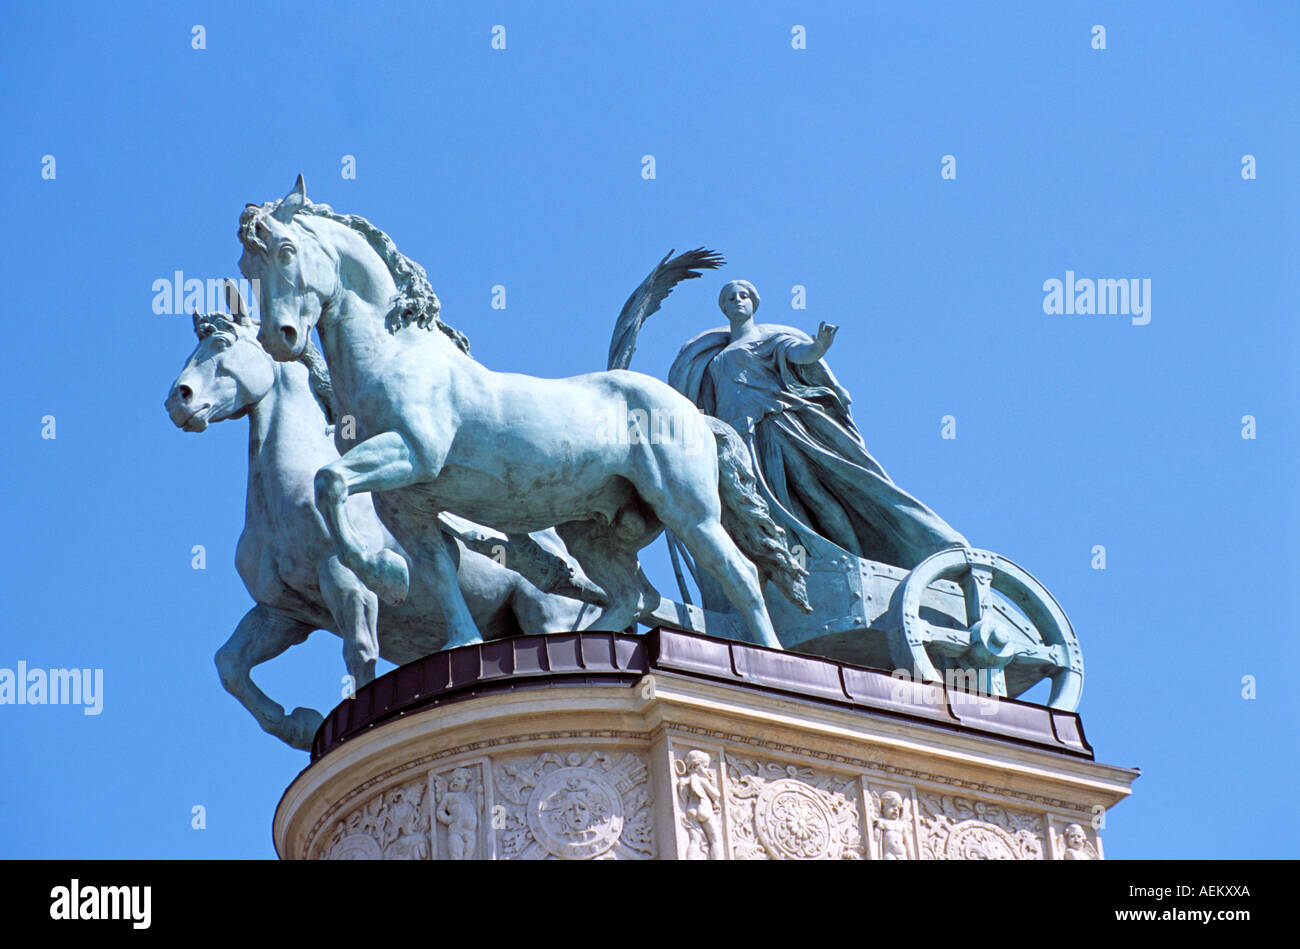 Statue on top of colonnade, part of Millennium Monument, Heroes’ Square, Budapest, Hungary Stock Photo